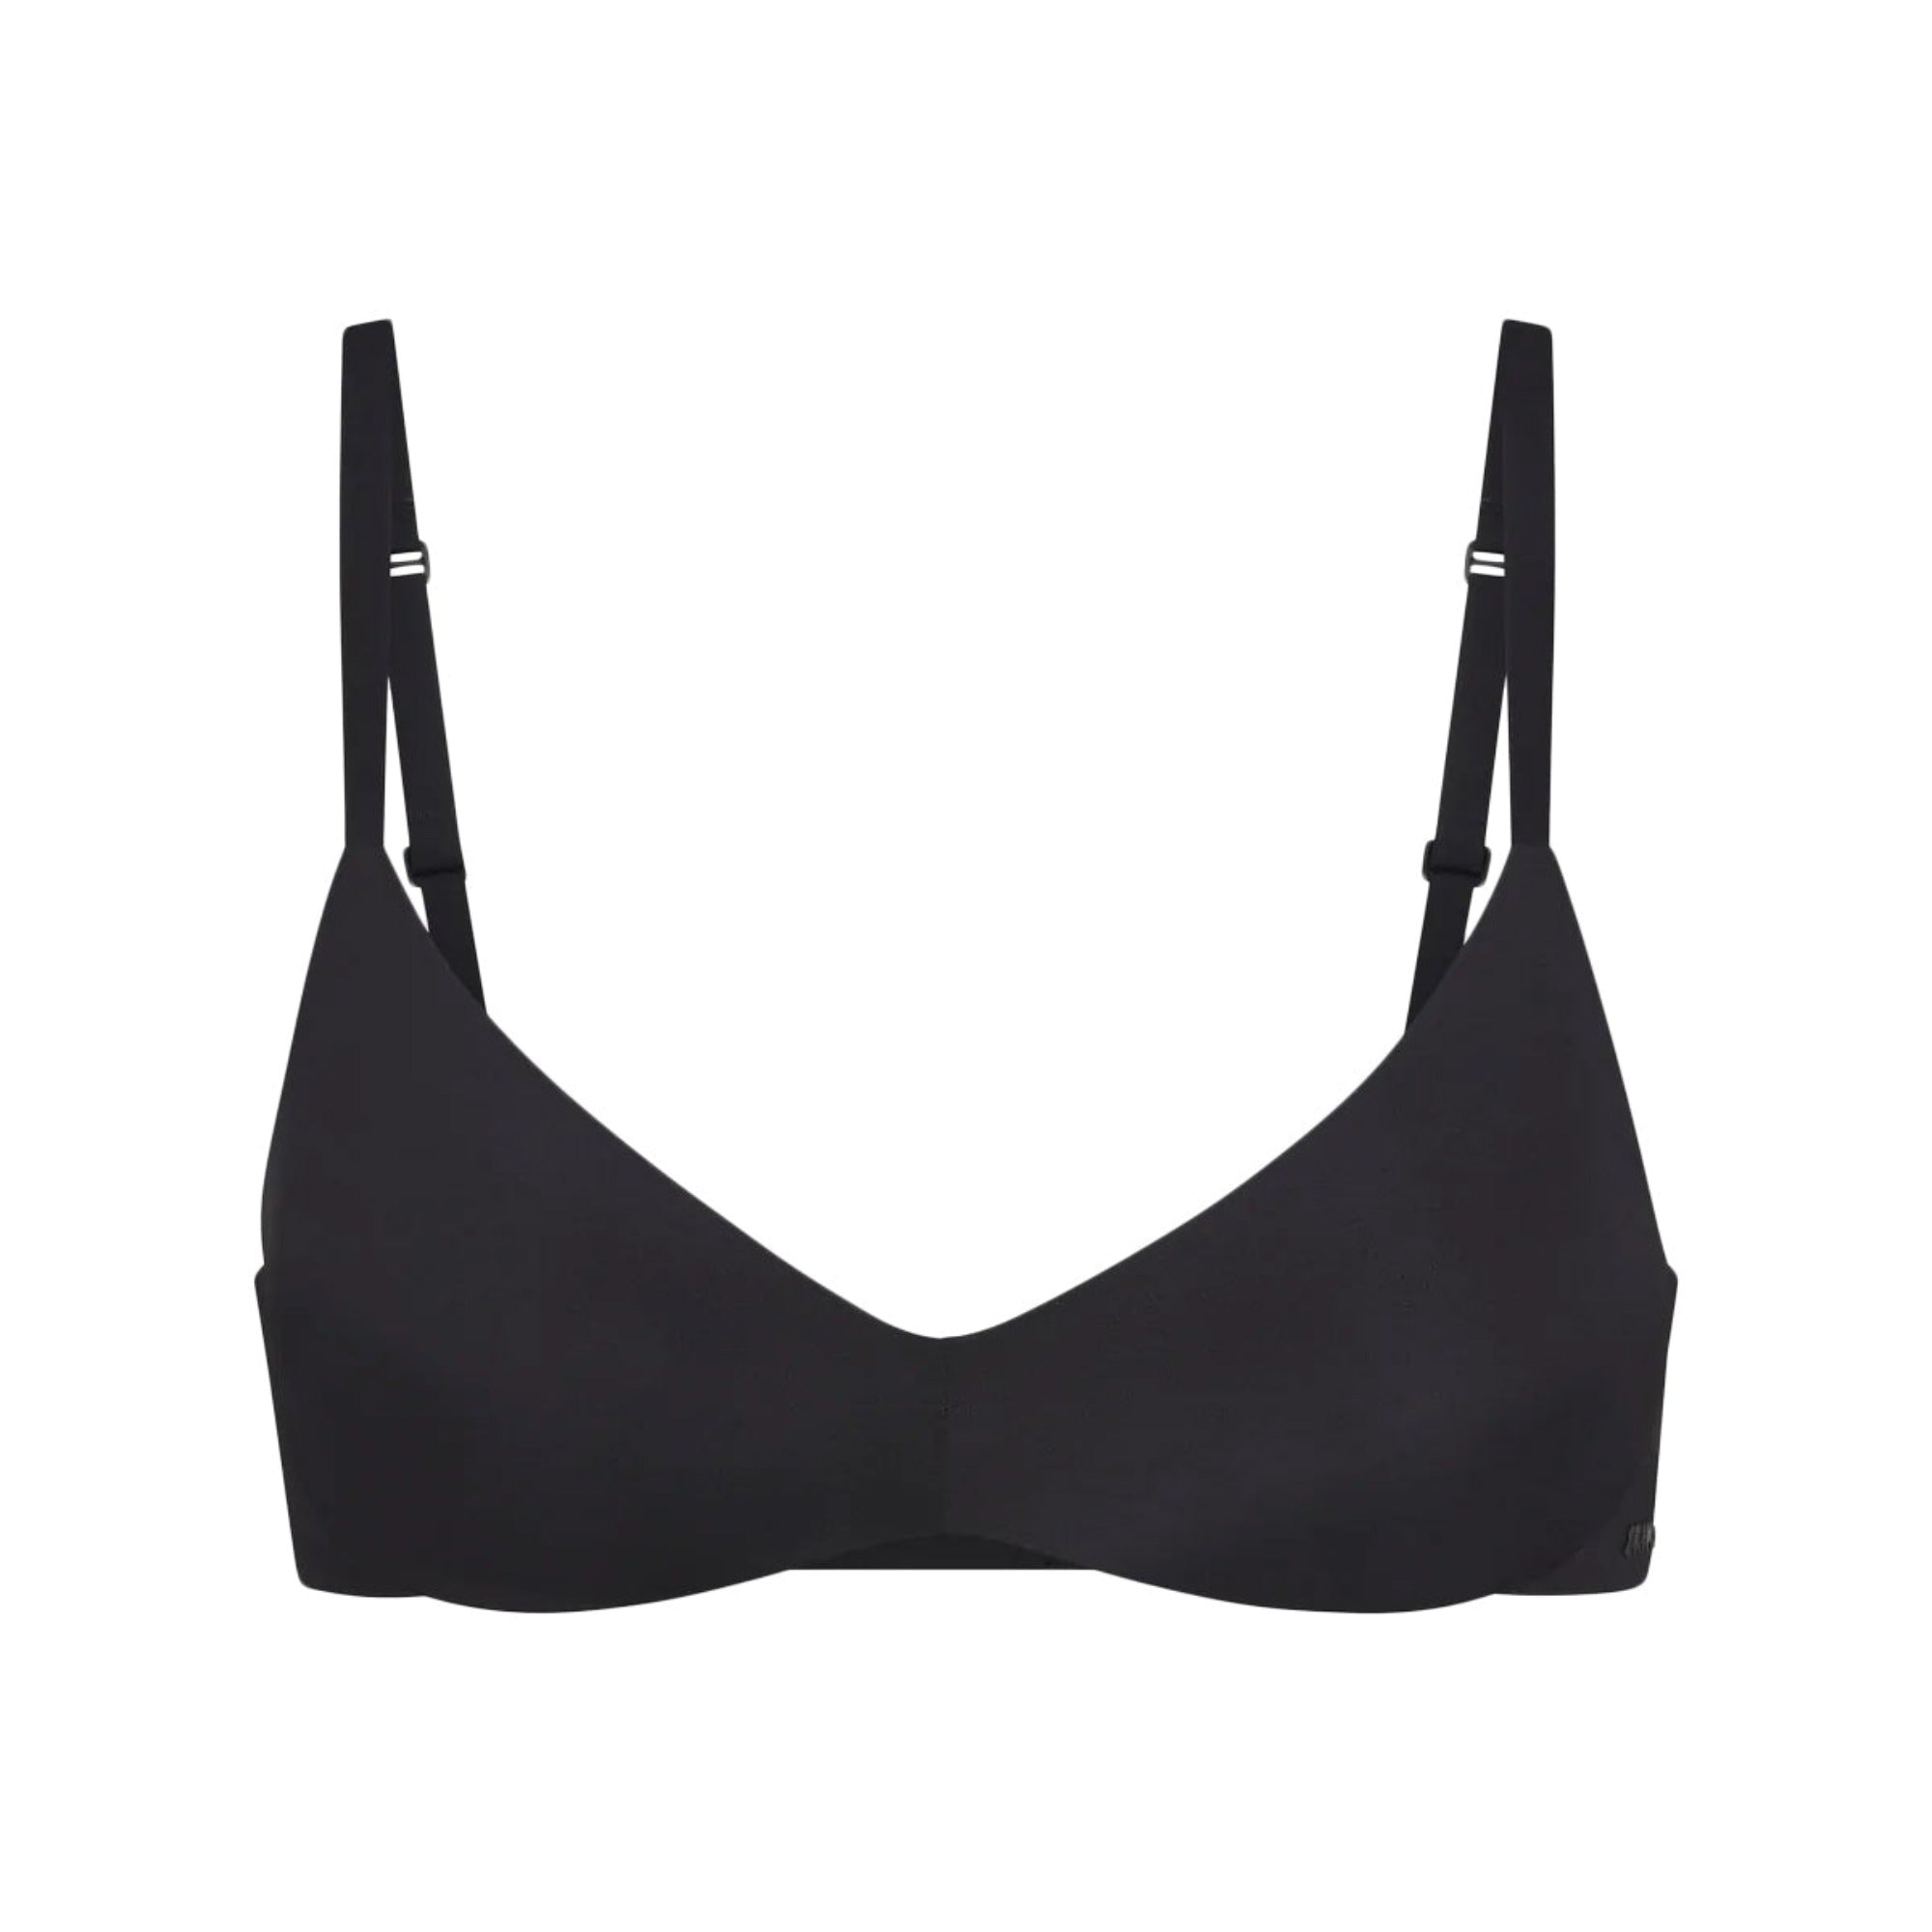 The Ultimate Bra by @SKIMS dropping 8/17 at 9 AM PT #ad #bestbra #push, skims push up